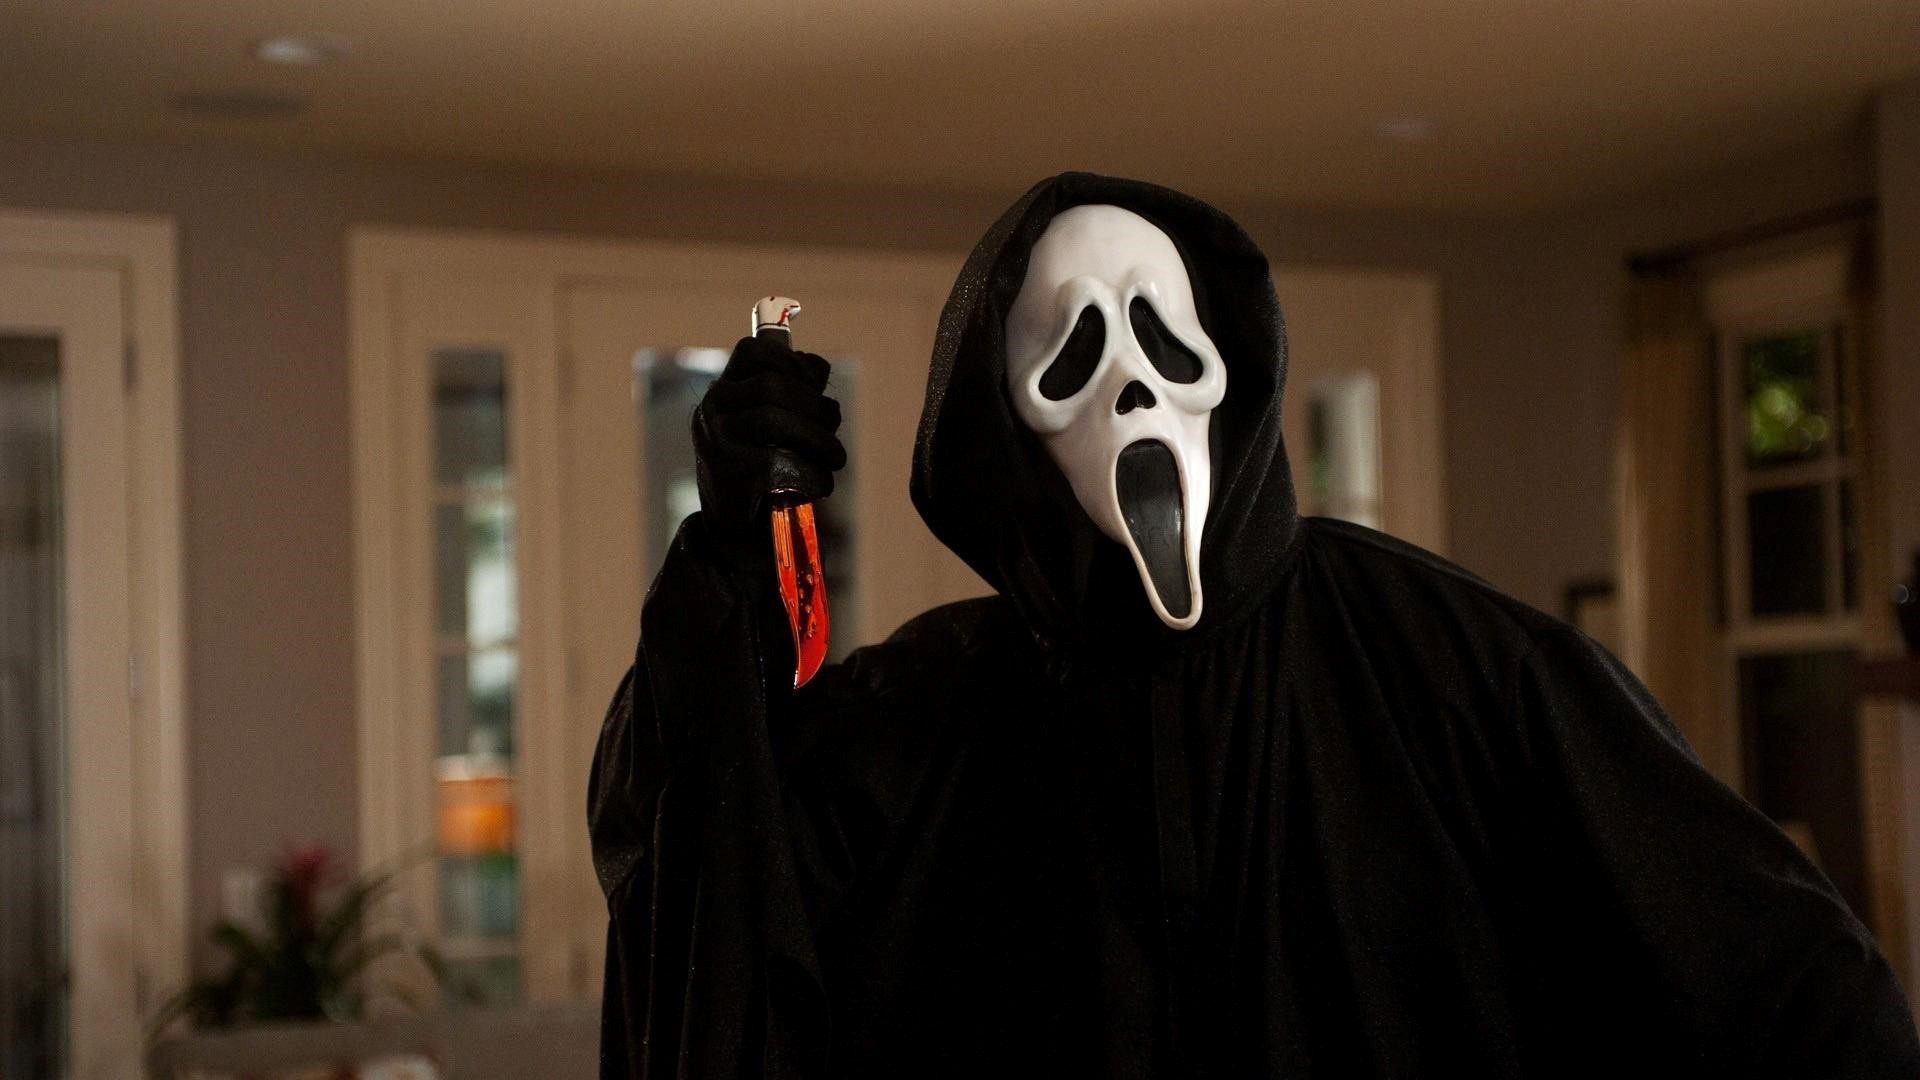 Ghostface from The Scream Movie Wallpaper - Download hd wallpapers